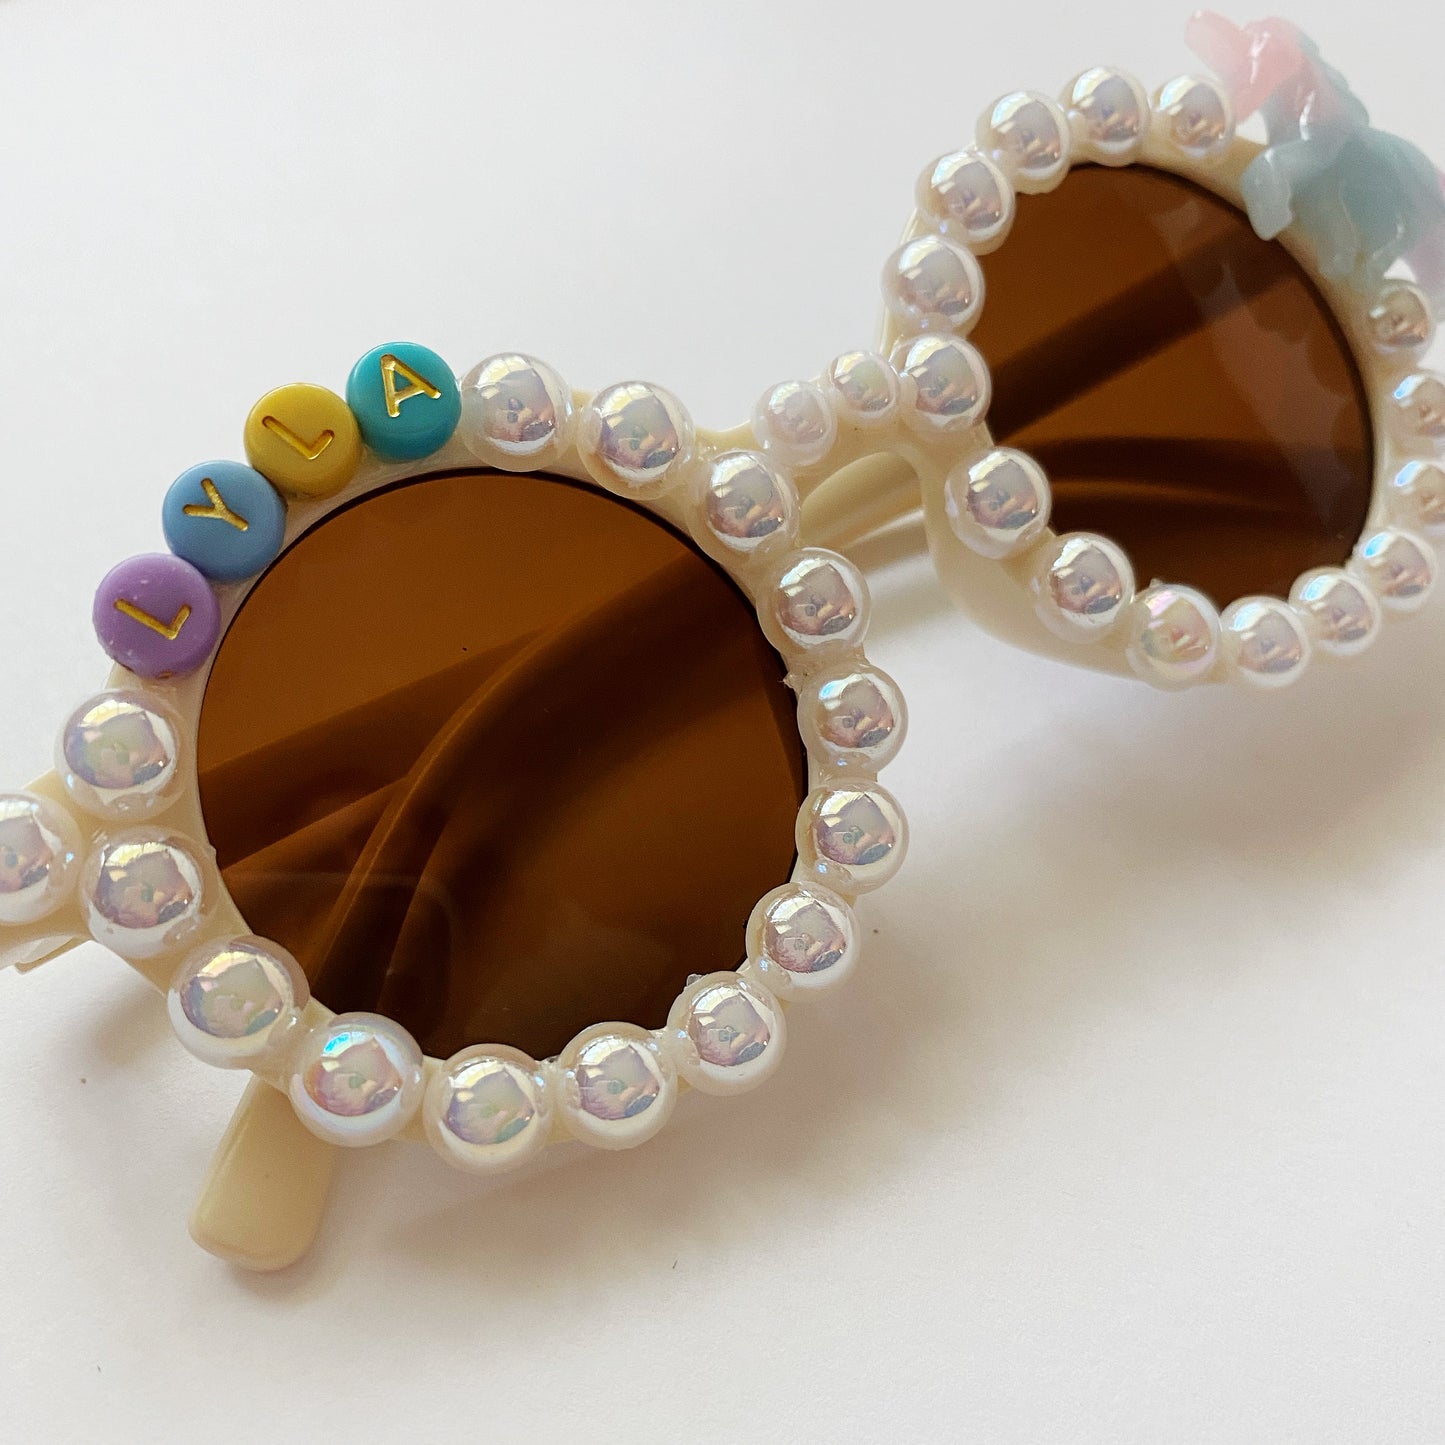 Round Baby Sunnies, More Styles Available